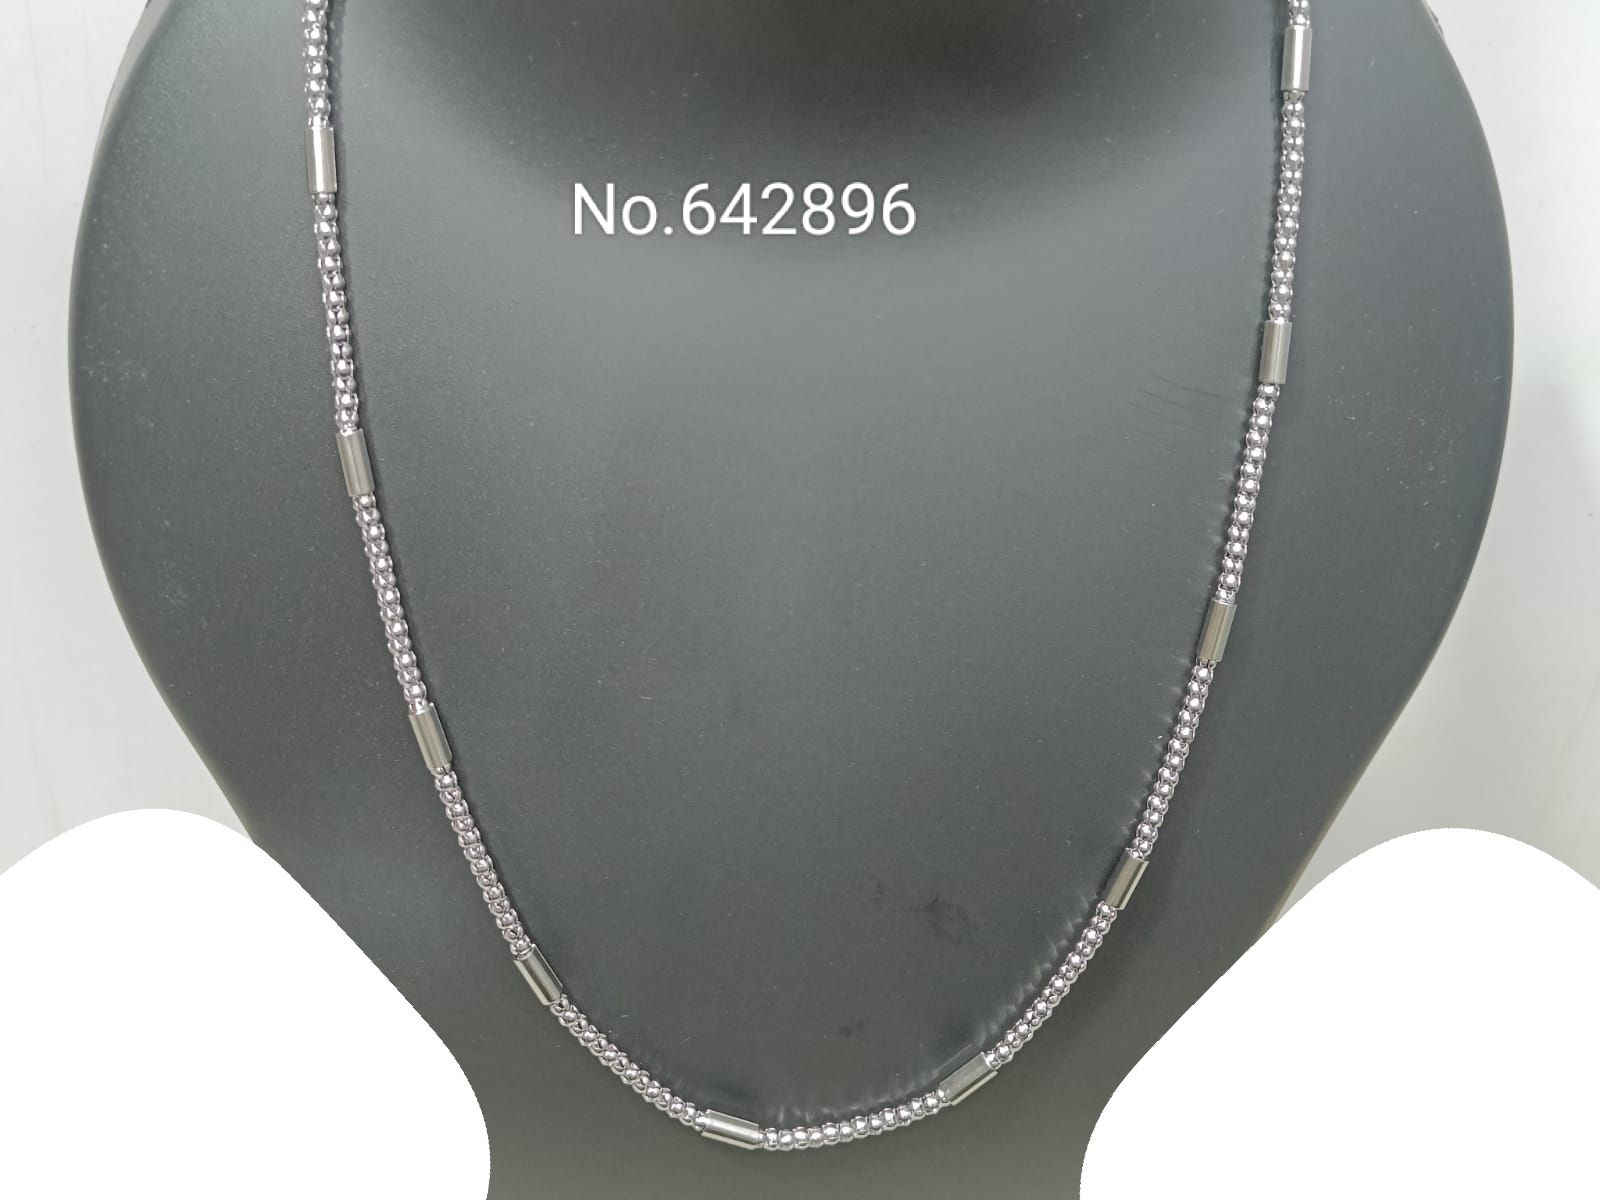 4mm Boys Men's King Byzantine Chain Necklace 925 Sterling Silver 26 inch | Chains  necklaces, 925 sterling silver, Sterling silver